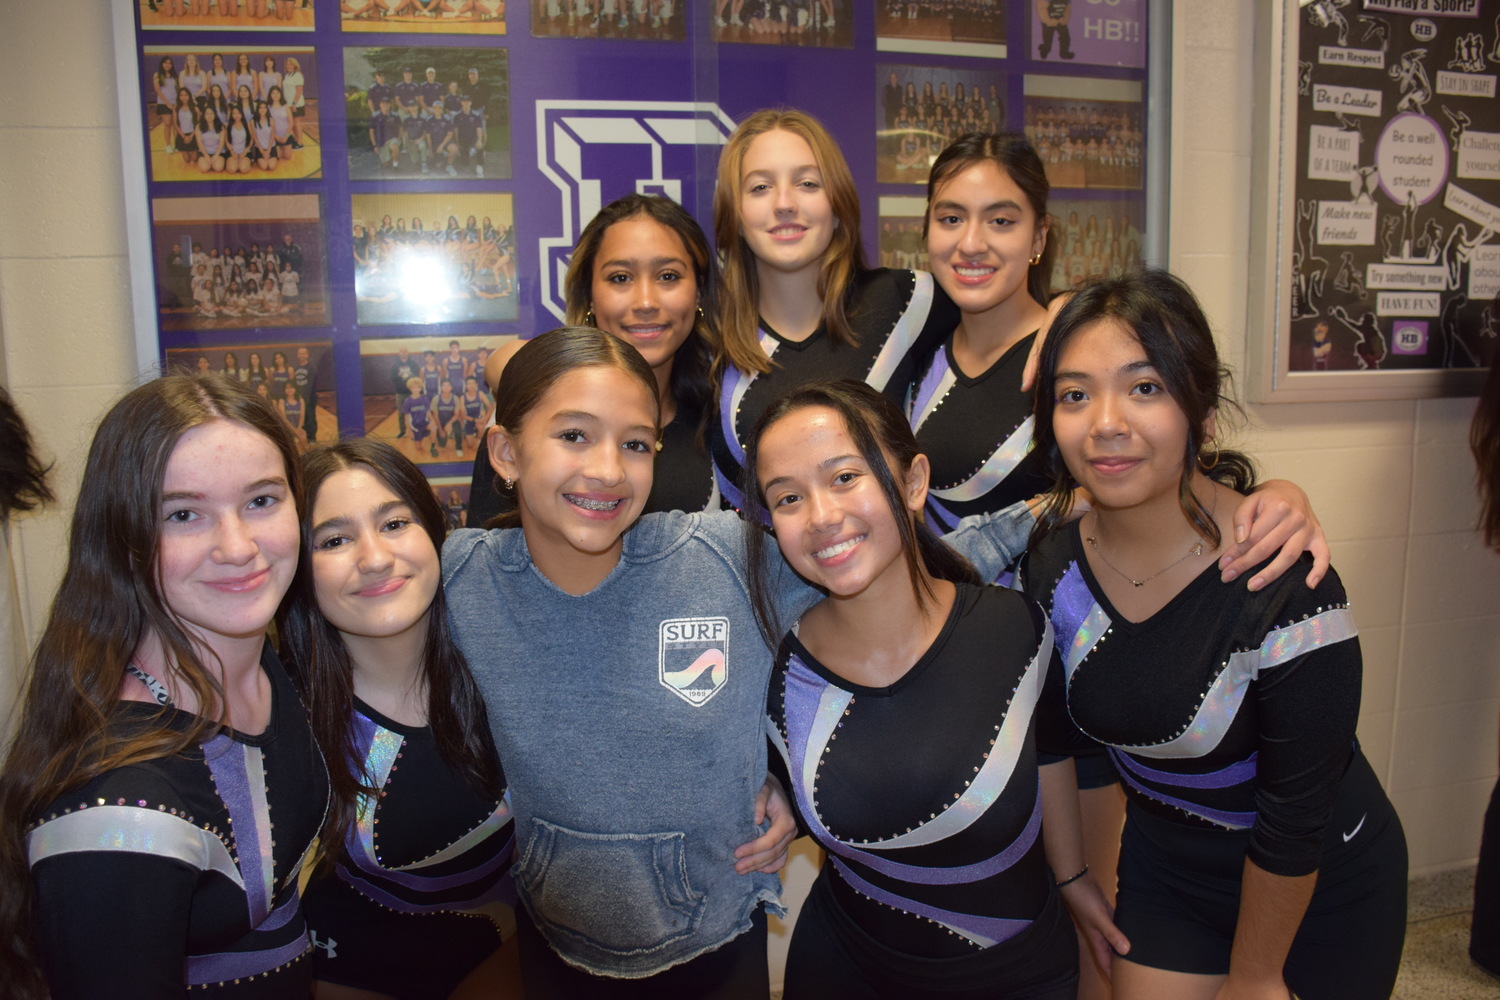 Cheerleaders helped build excitement and pride when  Hampton Bays High School celebrated homecoming during the week of October 10. The week included spirit days, a pep rally, an annual parade and bonfire, as well as a dance. COURTESY HAMPTON BAYS SCHOOL DISTRICT